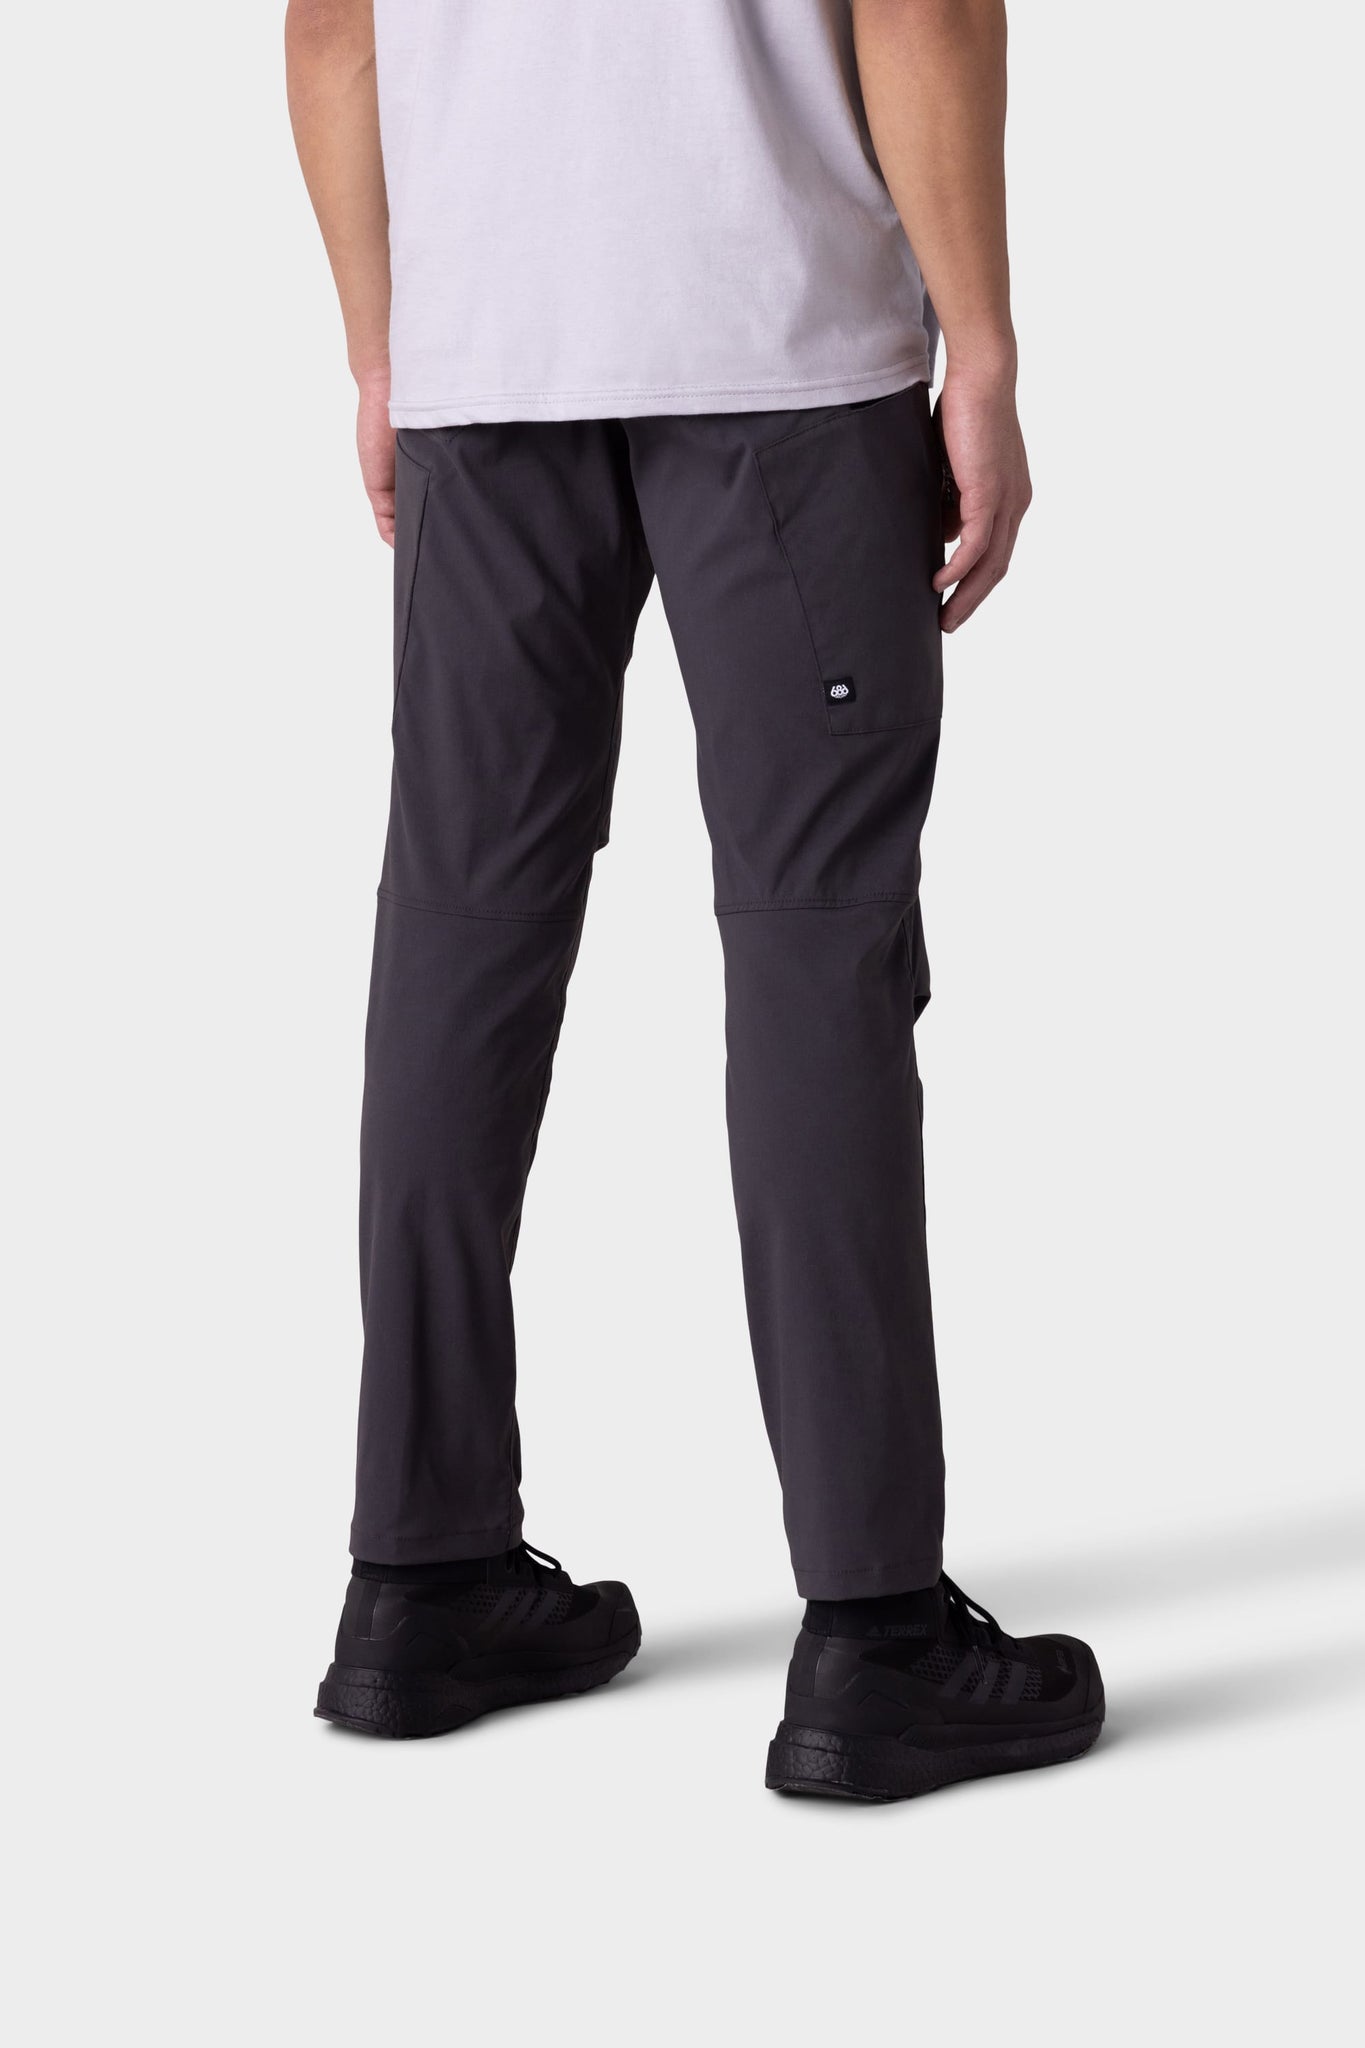 686 - Anything Cargo Pant Slim Fit - all things being eco chilliwack canada - men's outdoor and athletic apparel - eco friendly carbon neutral fashion